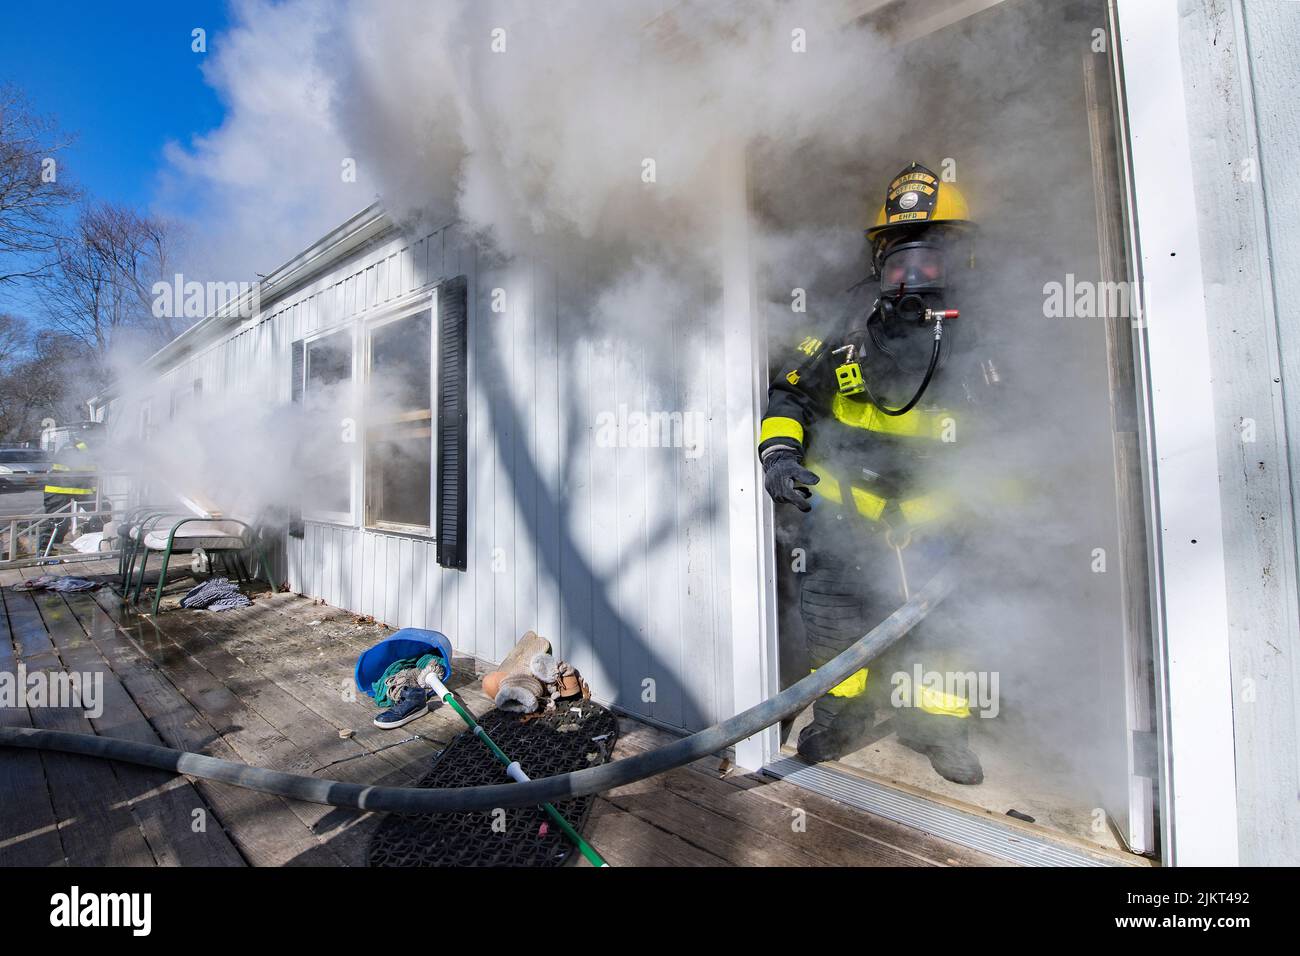 A fire Safety Officer exits the home as at 12:26 p.m. on Wednesday, February 28th, 2018, members of the East Hampton Fire Department responded to the Stock Photo